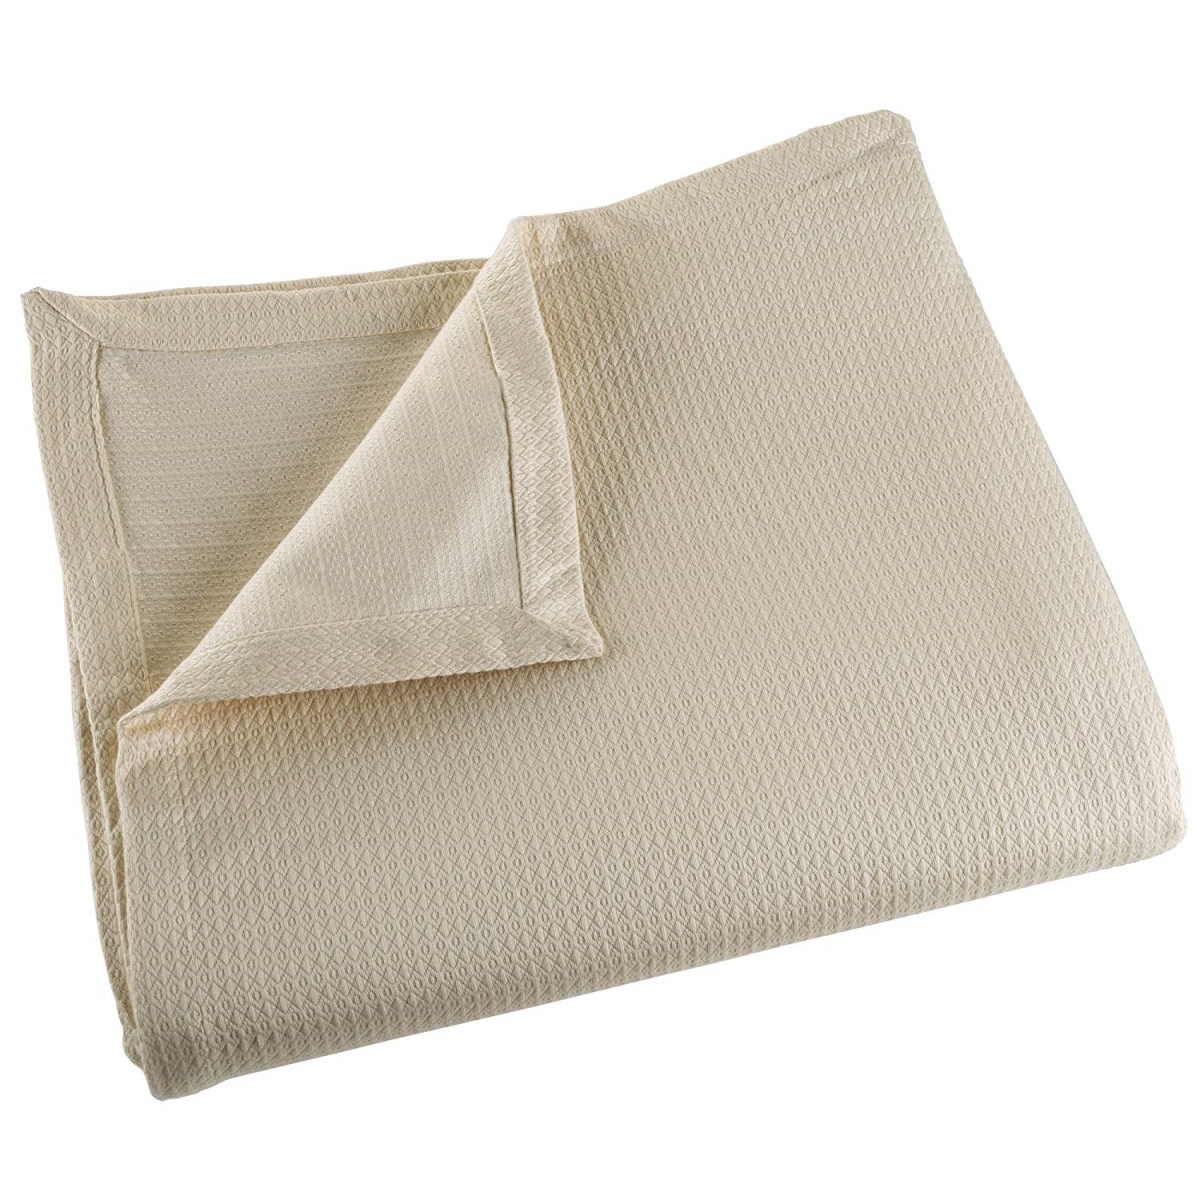 61a-43333 Soft Breathable 100 Percent Cotton Blanket, Taupe - King Size